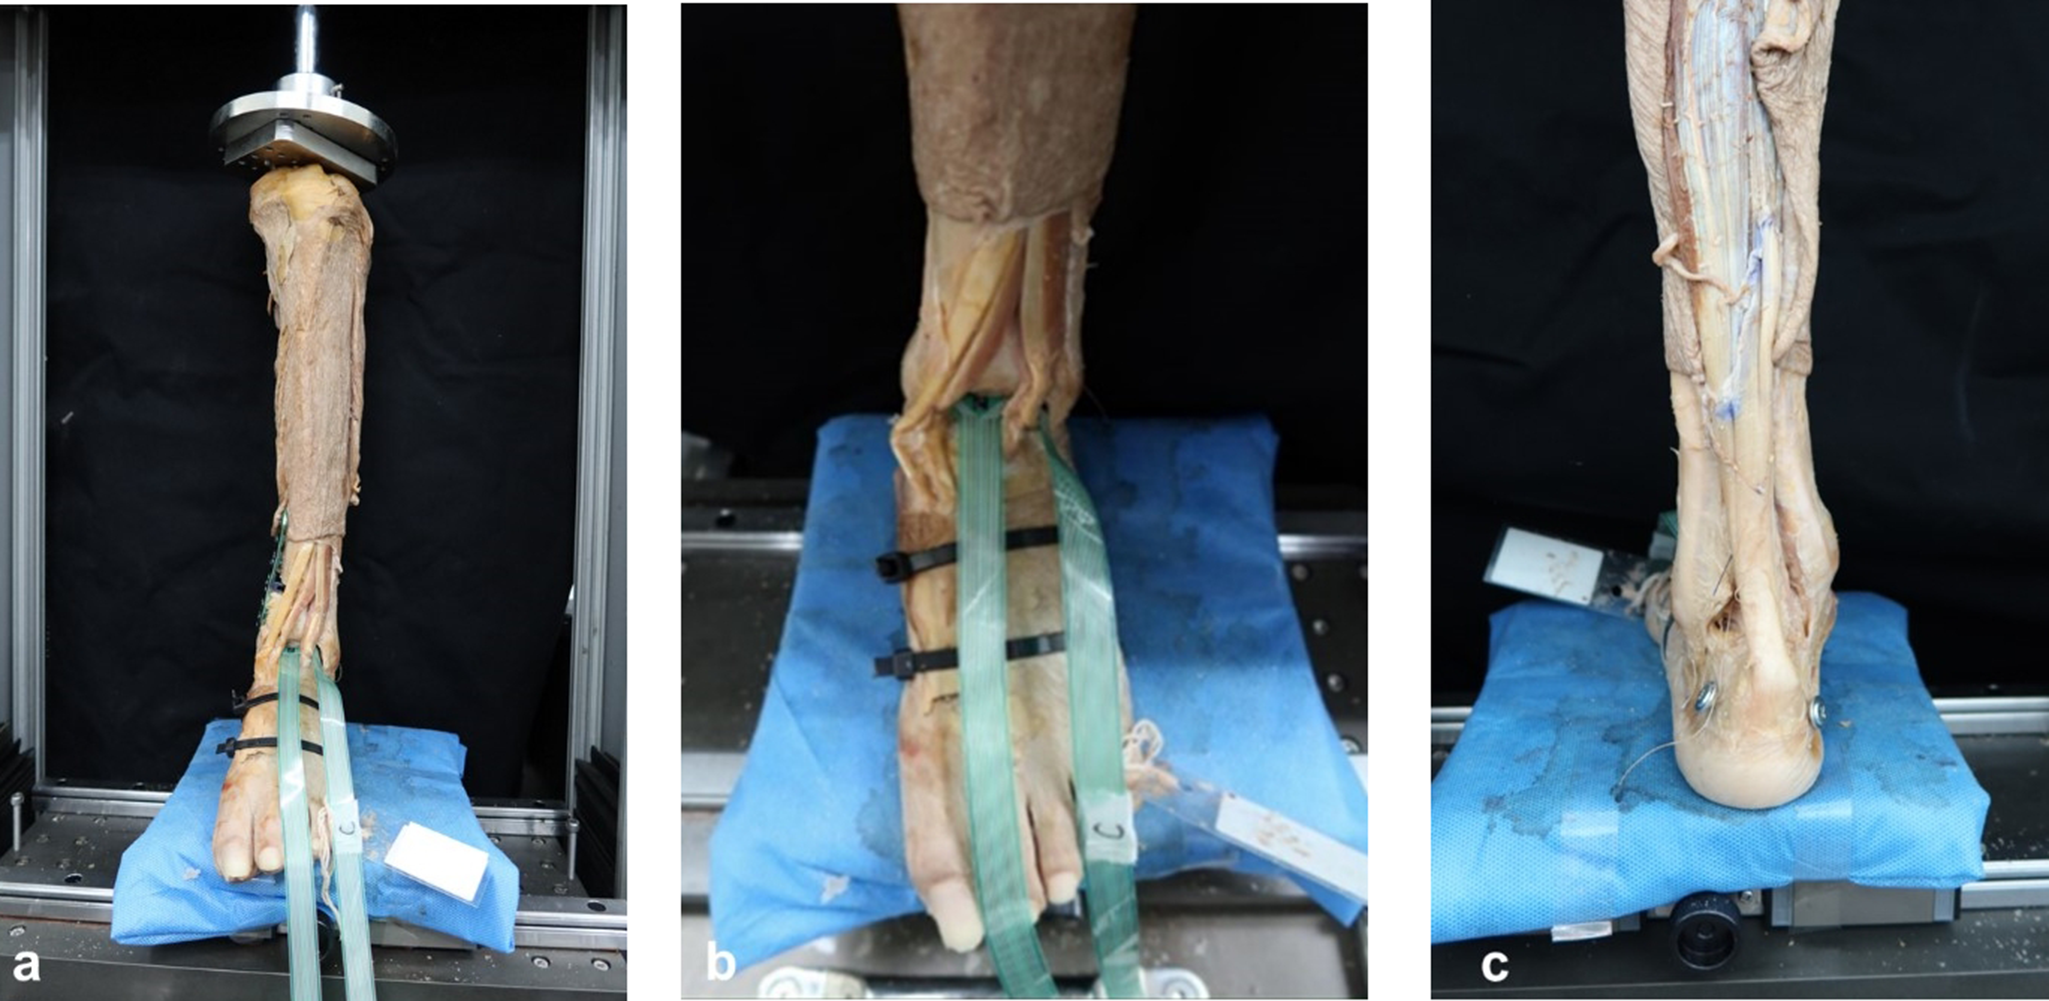 The effects of medial soft tissue release for varus deformity during medial open wedge supramalleolar osteotomy: a cadaveric study